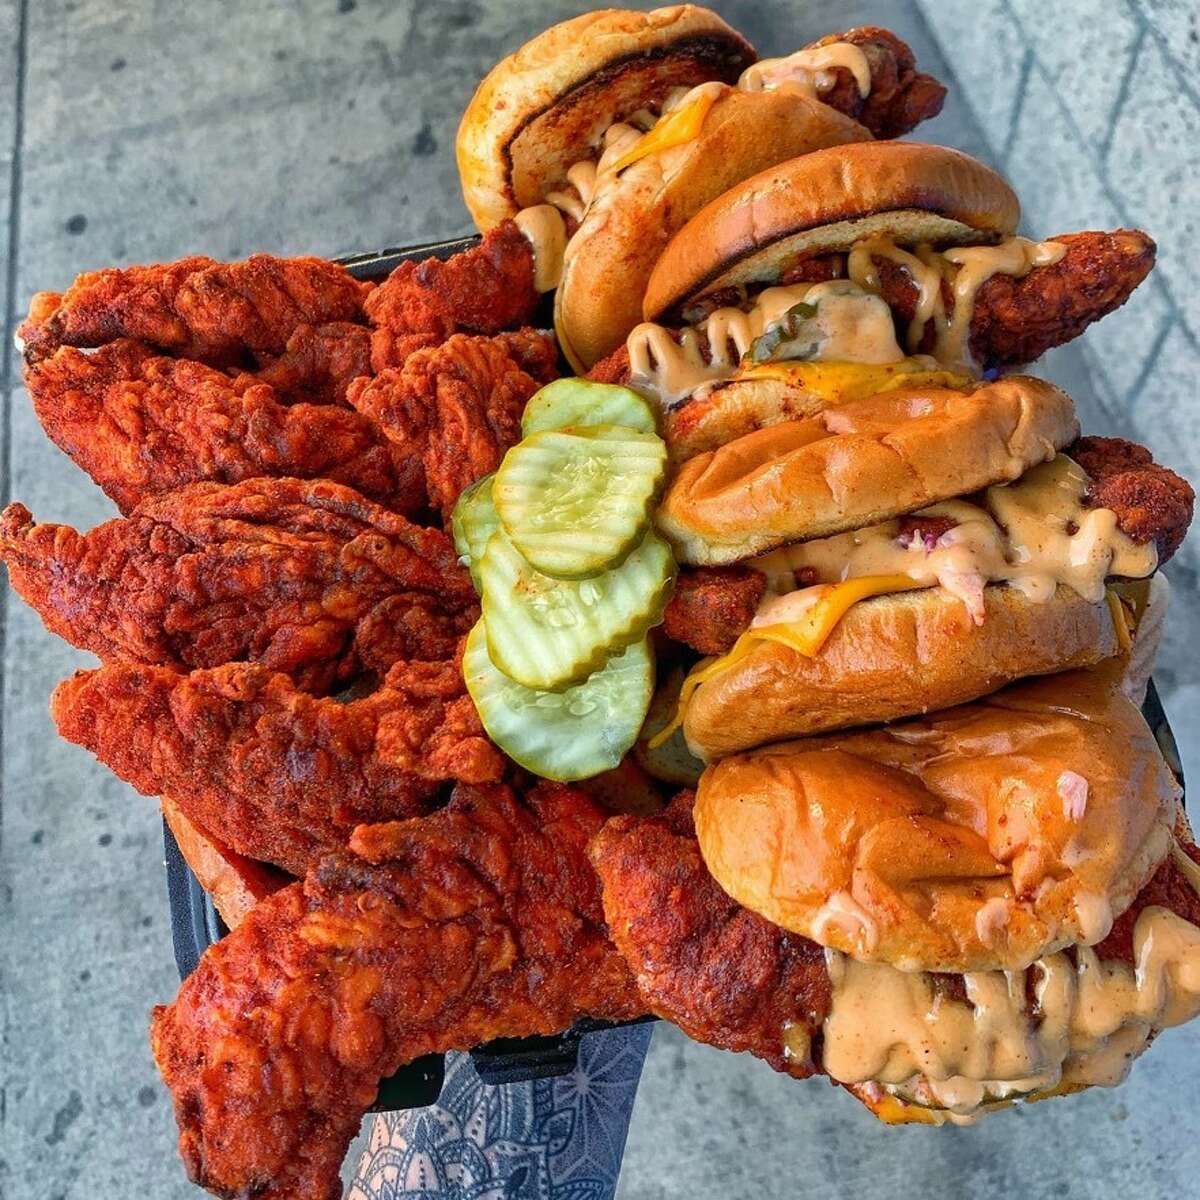 The hype-fueled, quickly expanding Dave's Hot Chicken is opening another location in the Bay Area this week.